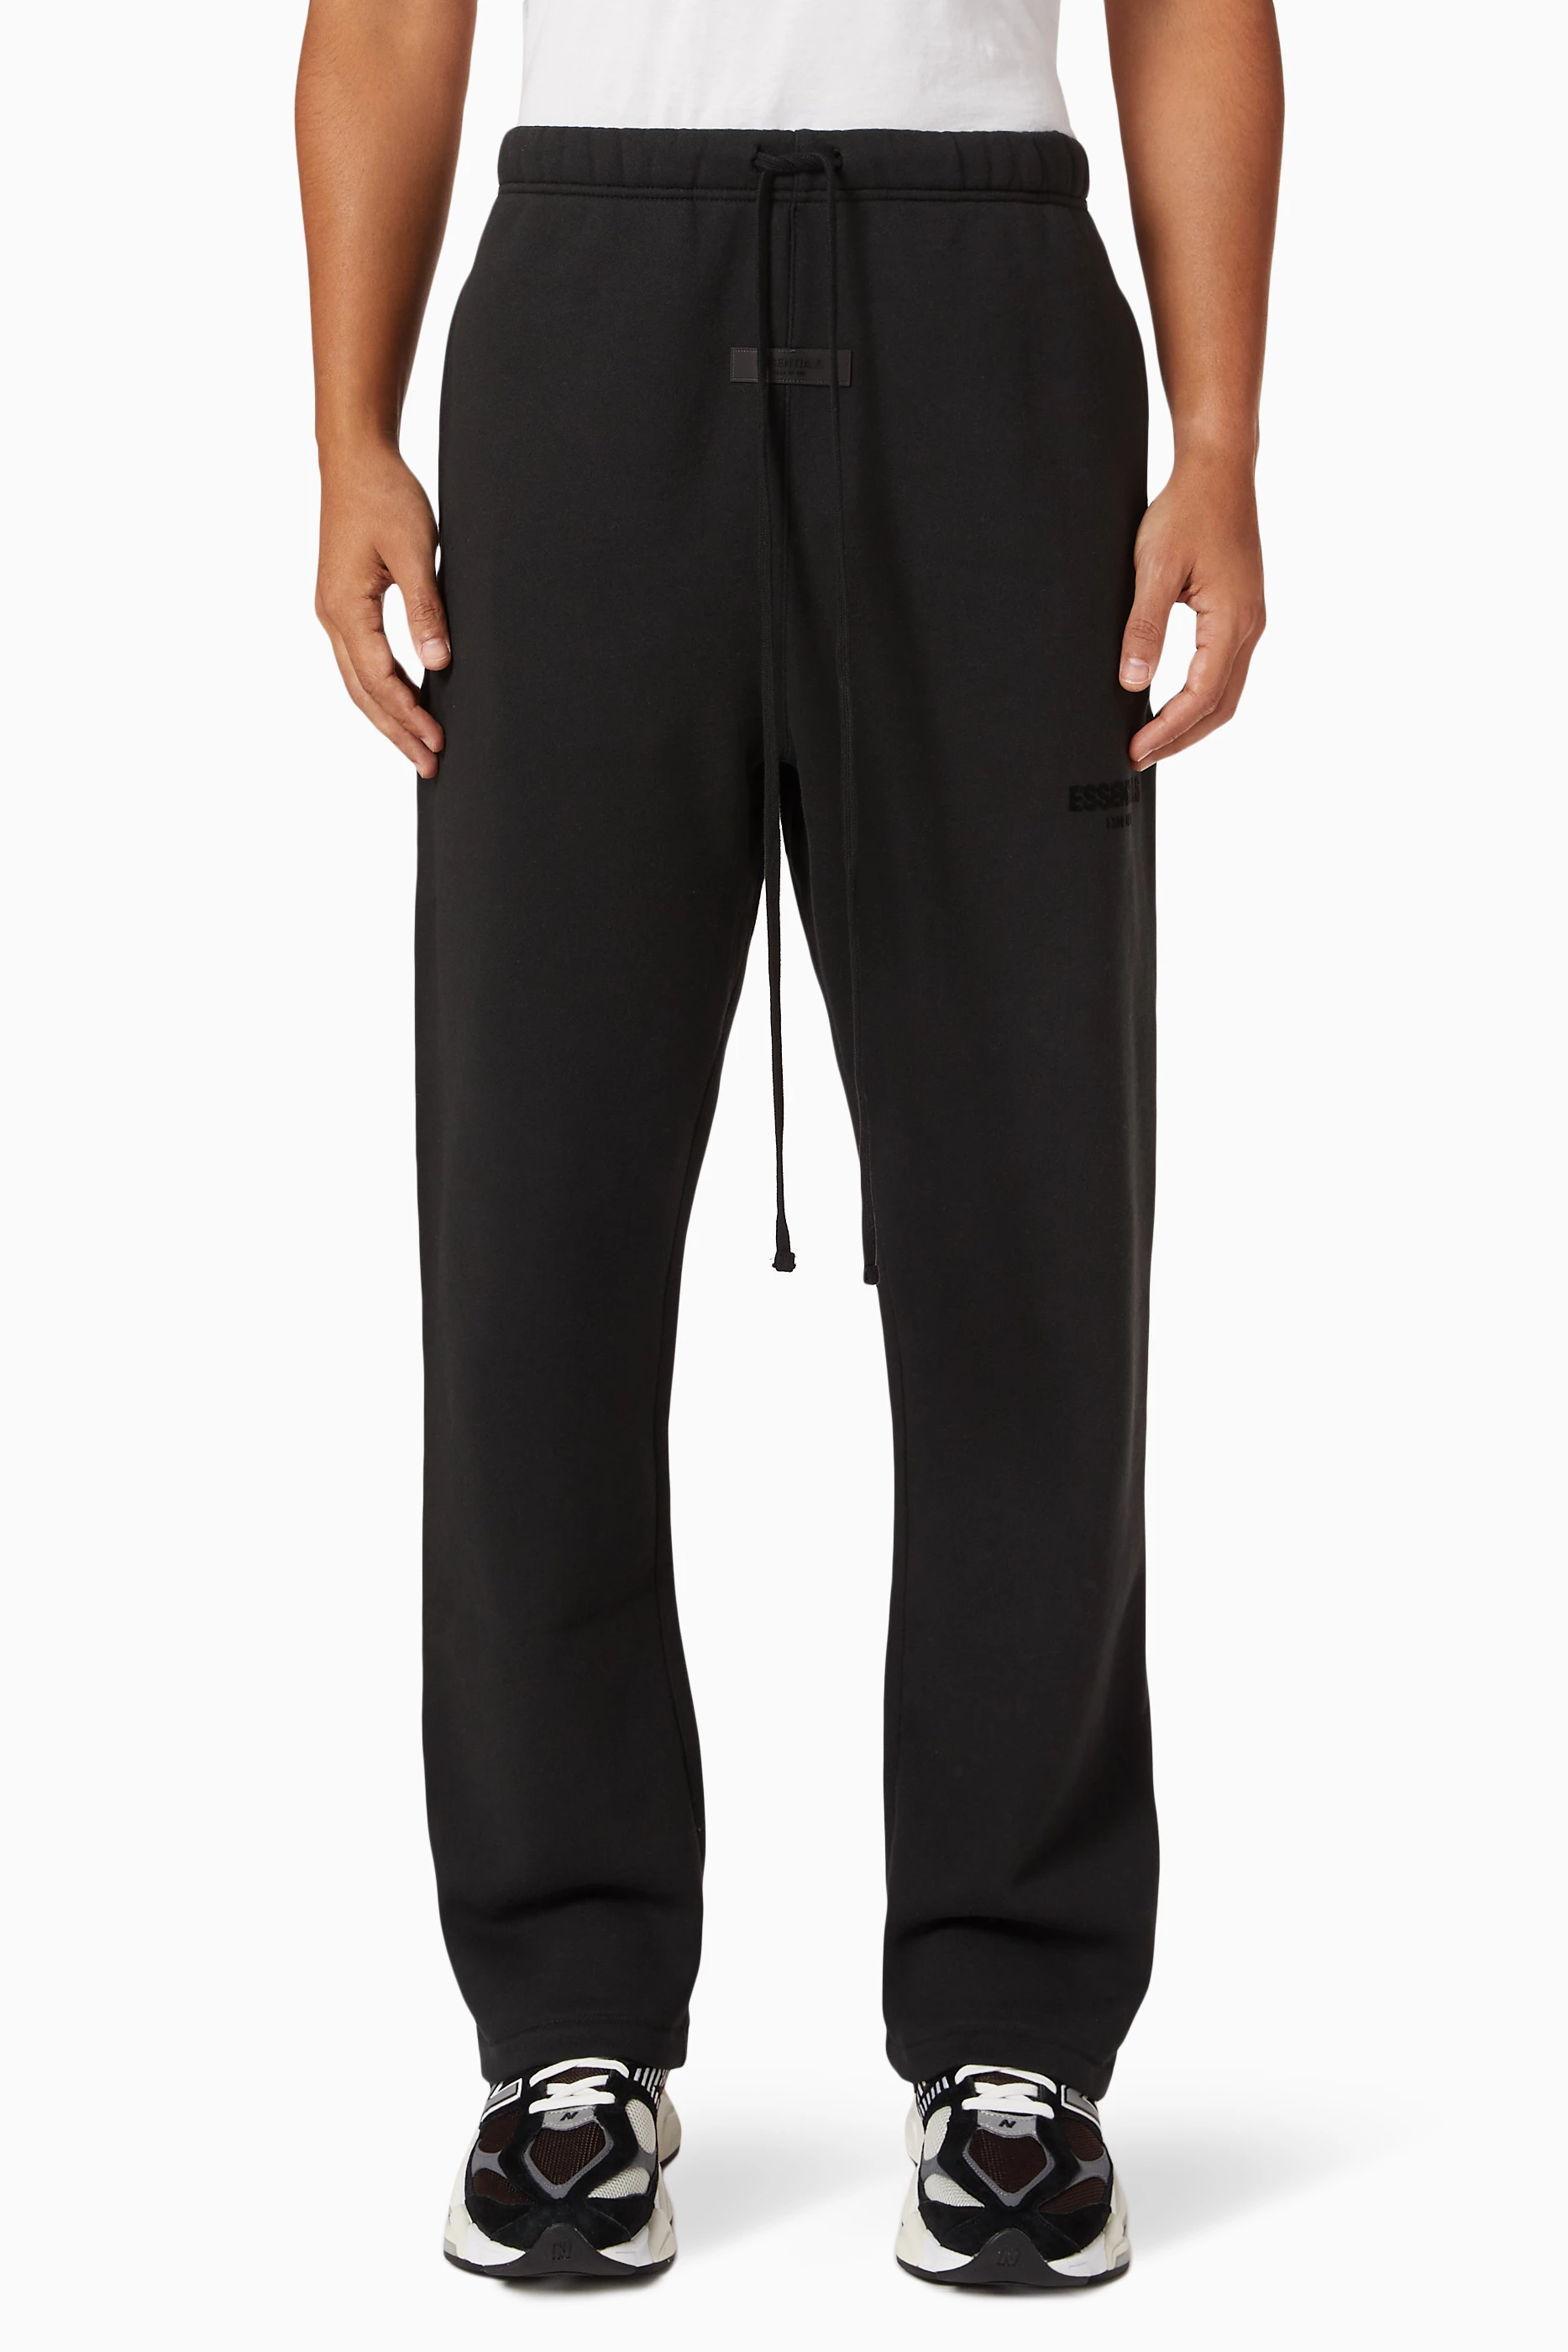 Buy Fear of God Essentials Black Relaxed Sweatpants in Fleece for